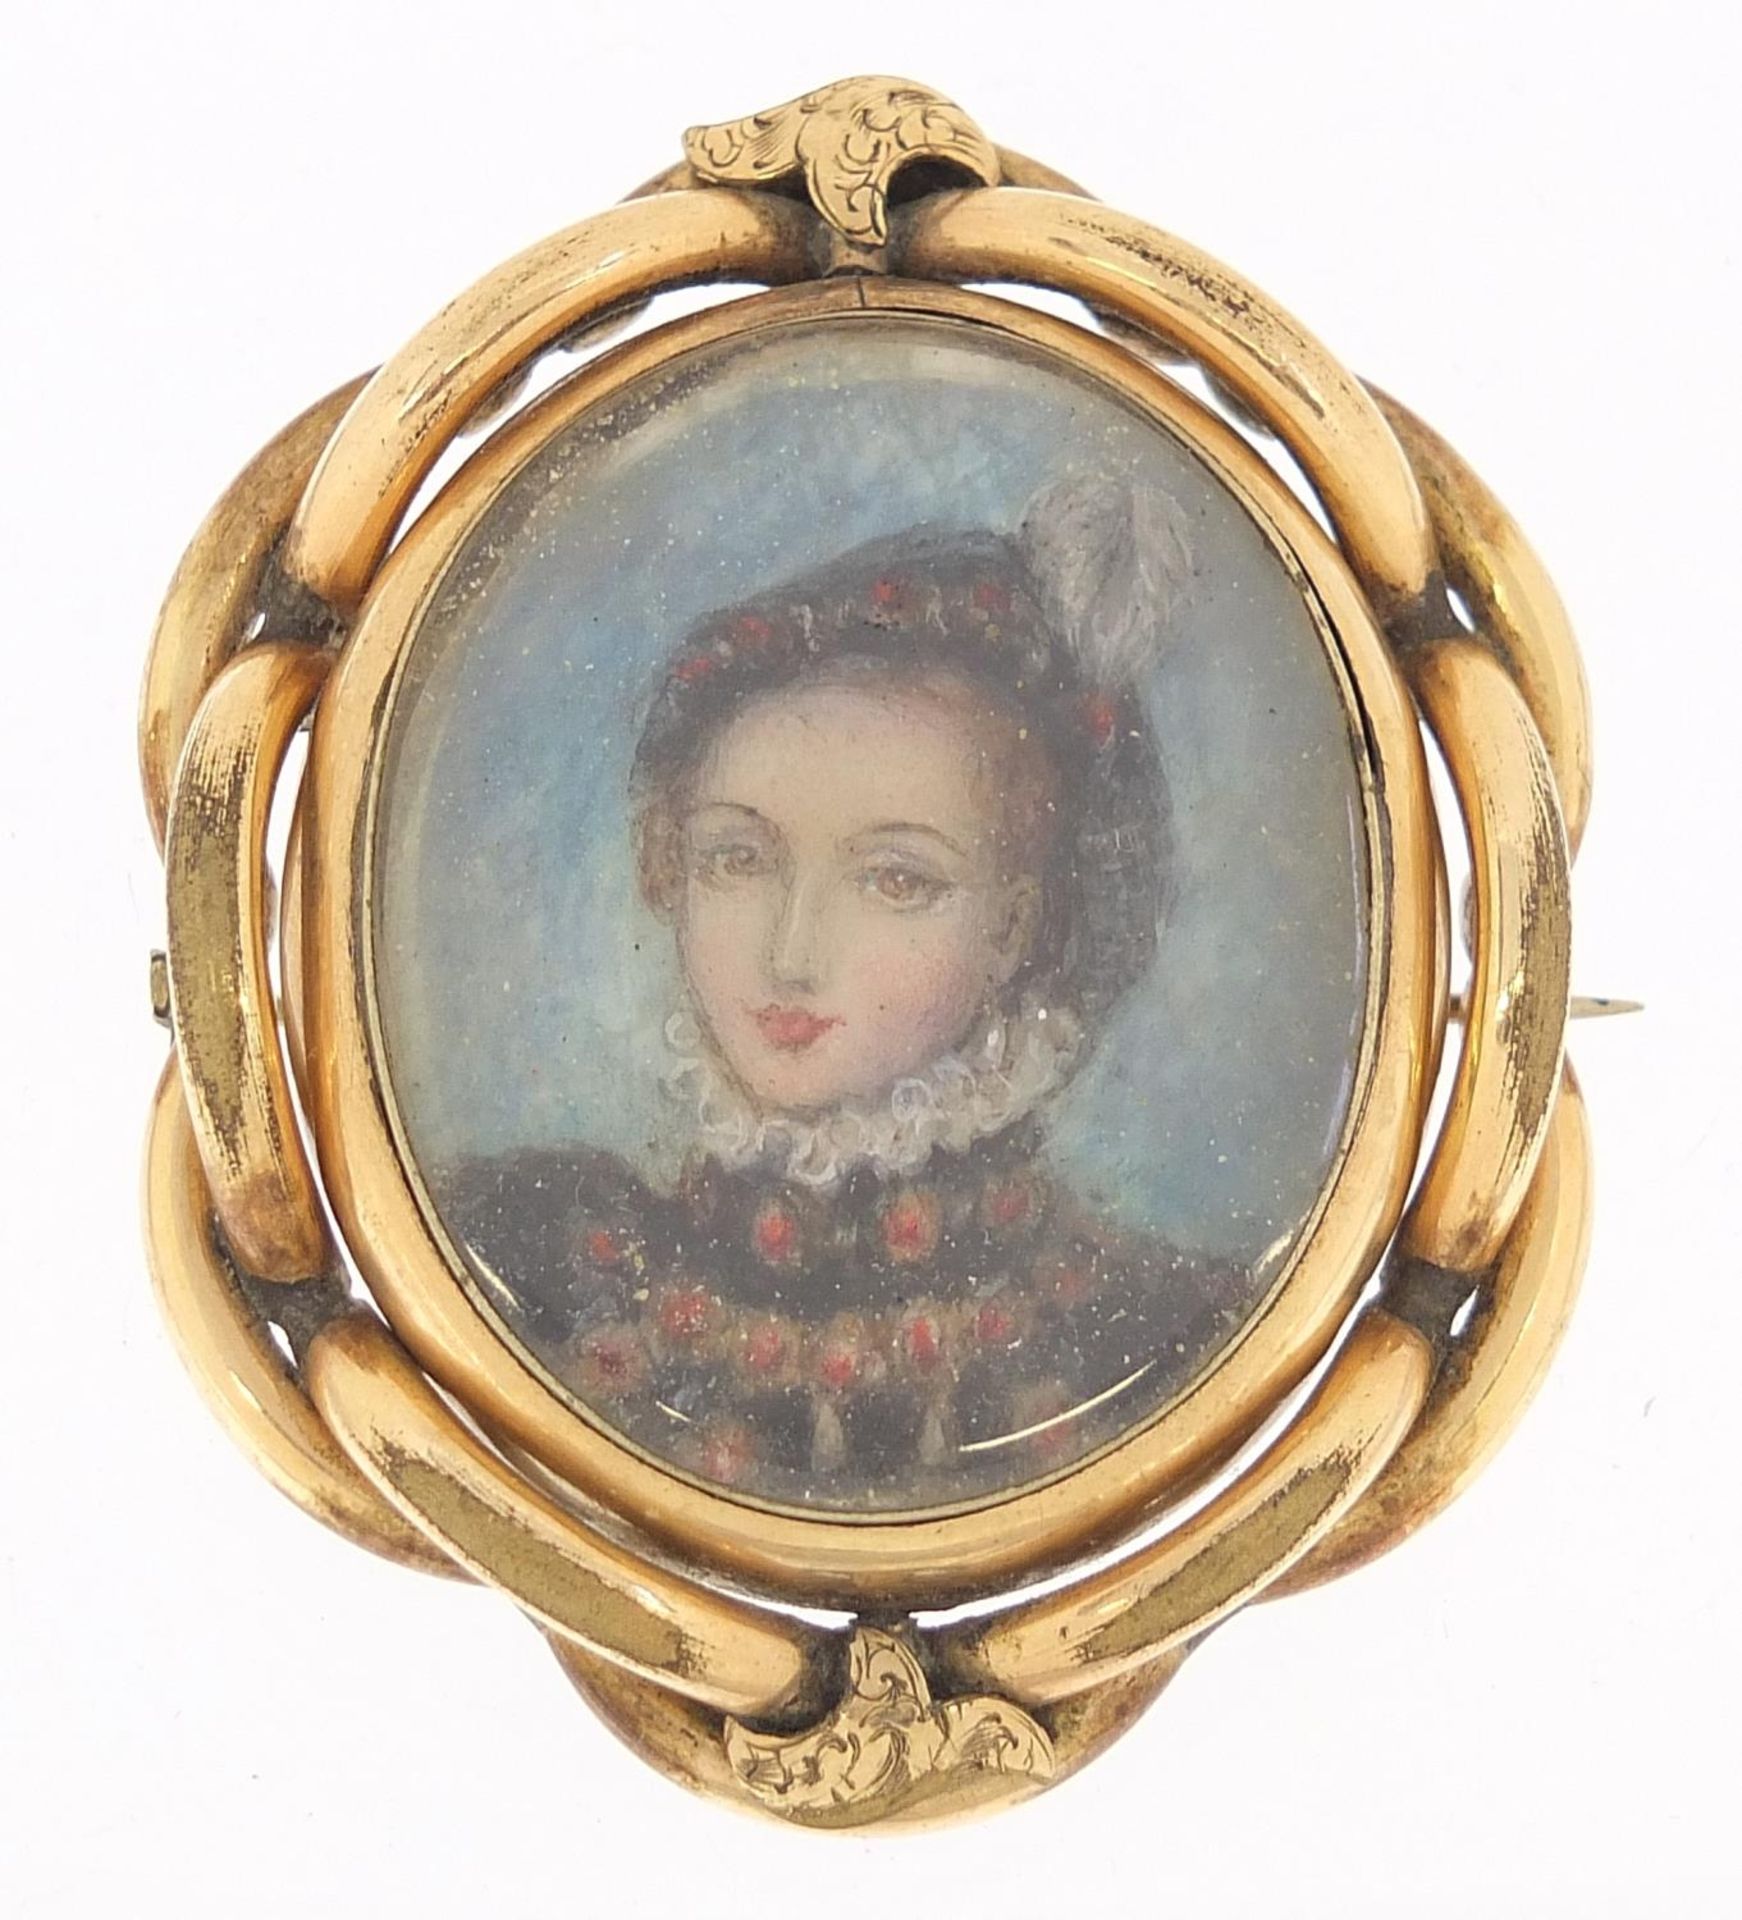 Victorian oval hand painted portrait miniature of a female in Elizabethan dress housed in a gilt